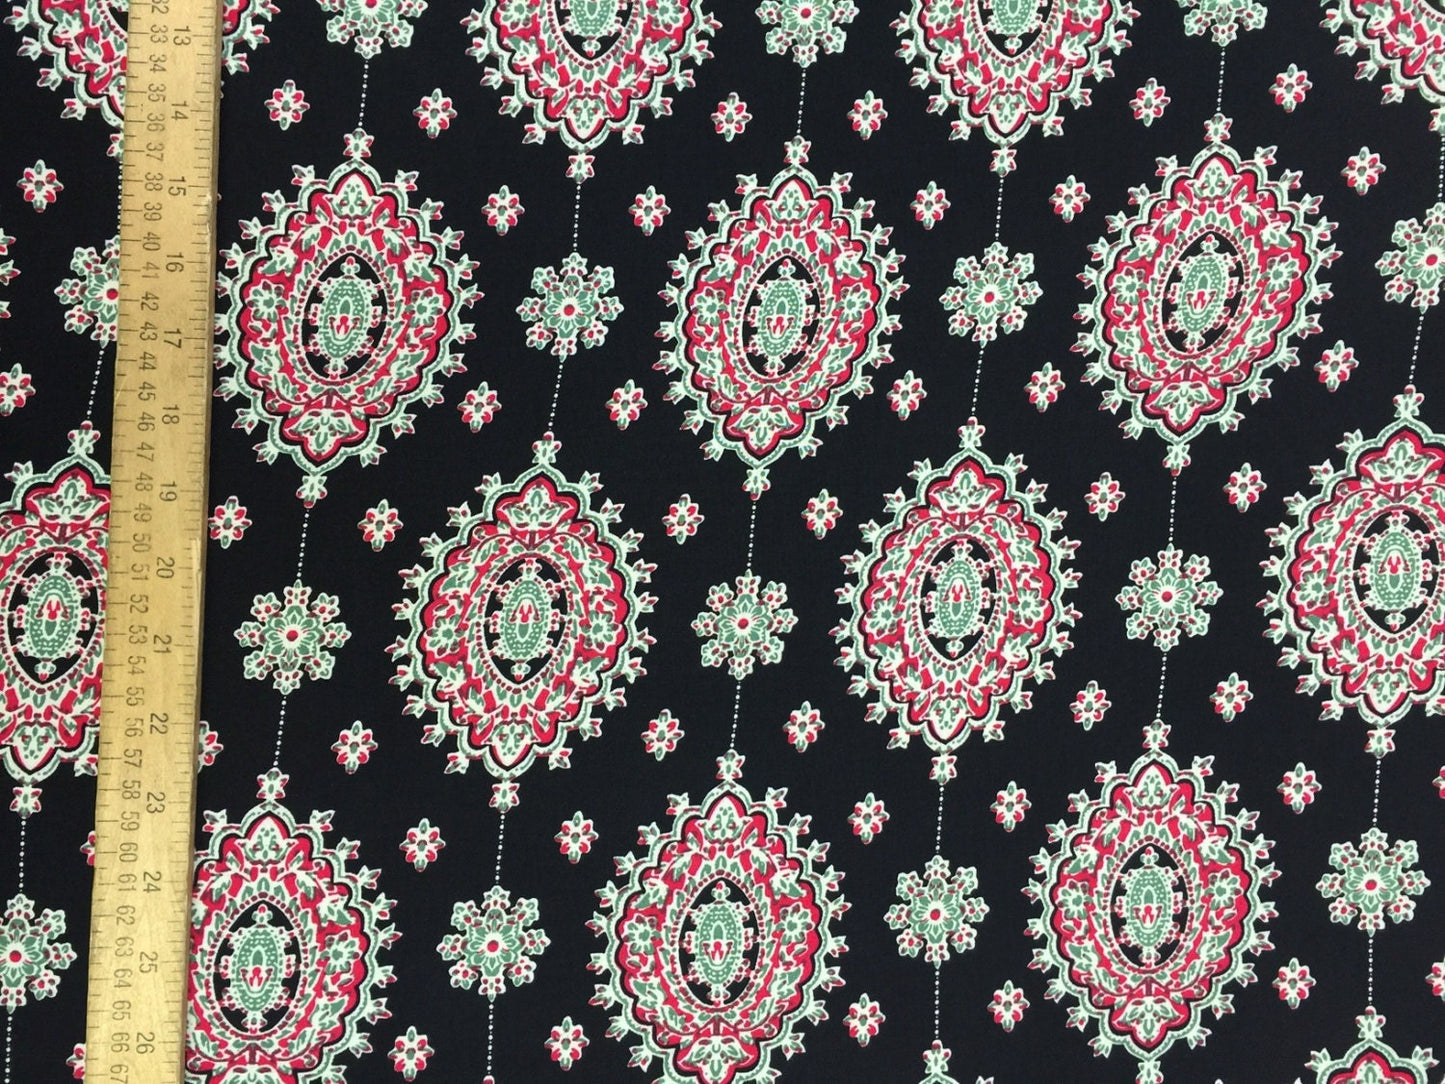 Rayon challis two border 58 inches wide fabric Black and fuchsia design sold by the yard soft organic kids dress draping clothing decoration